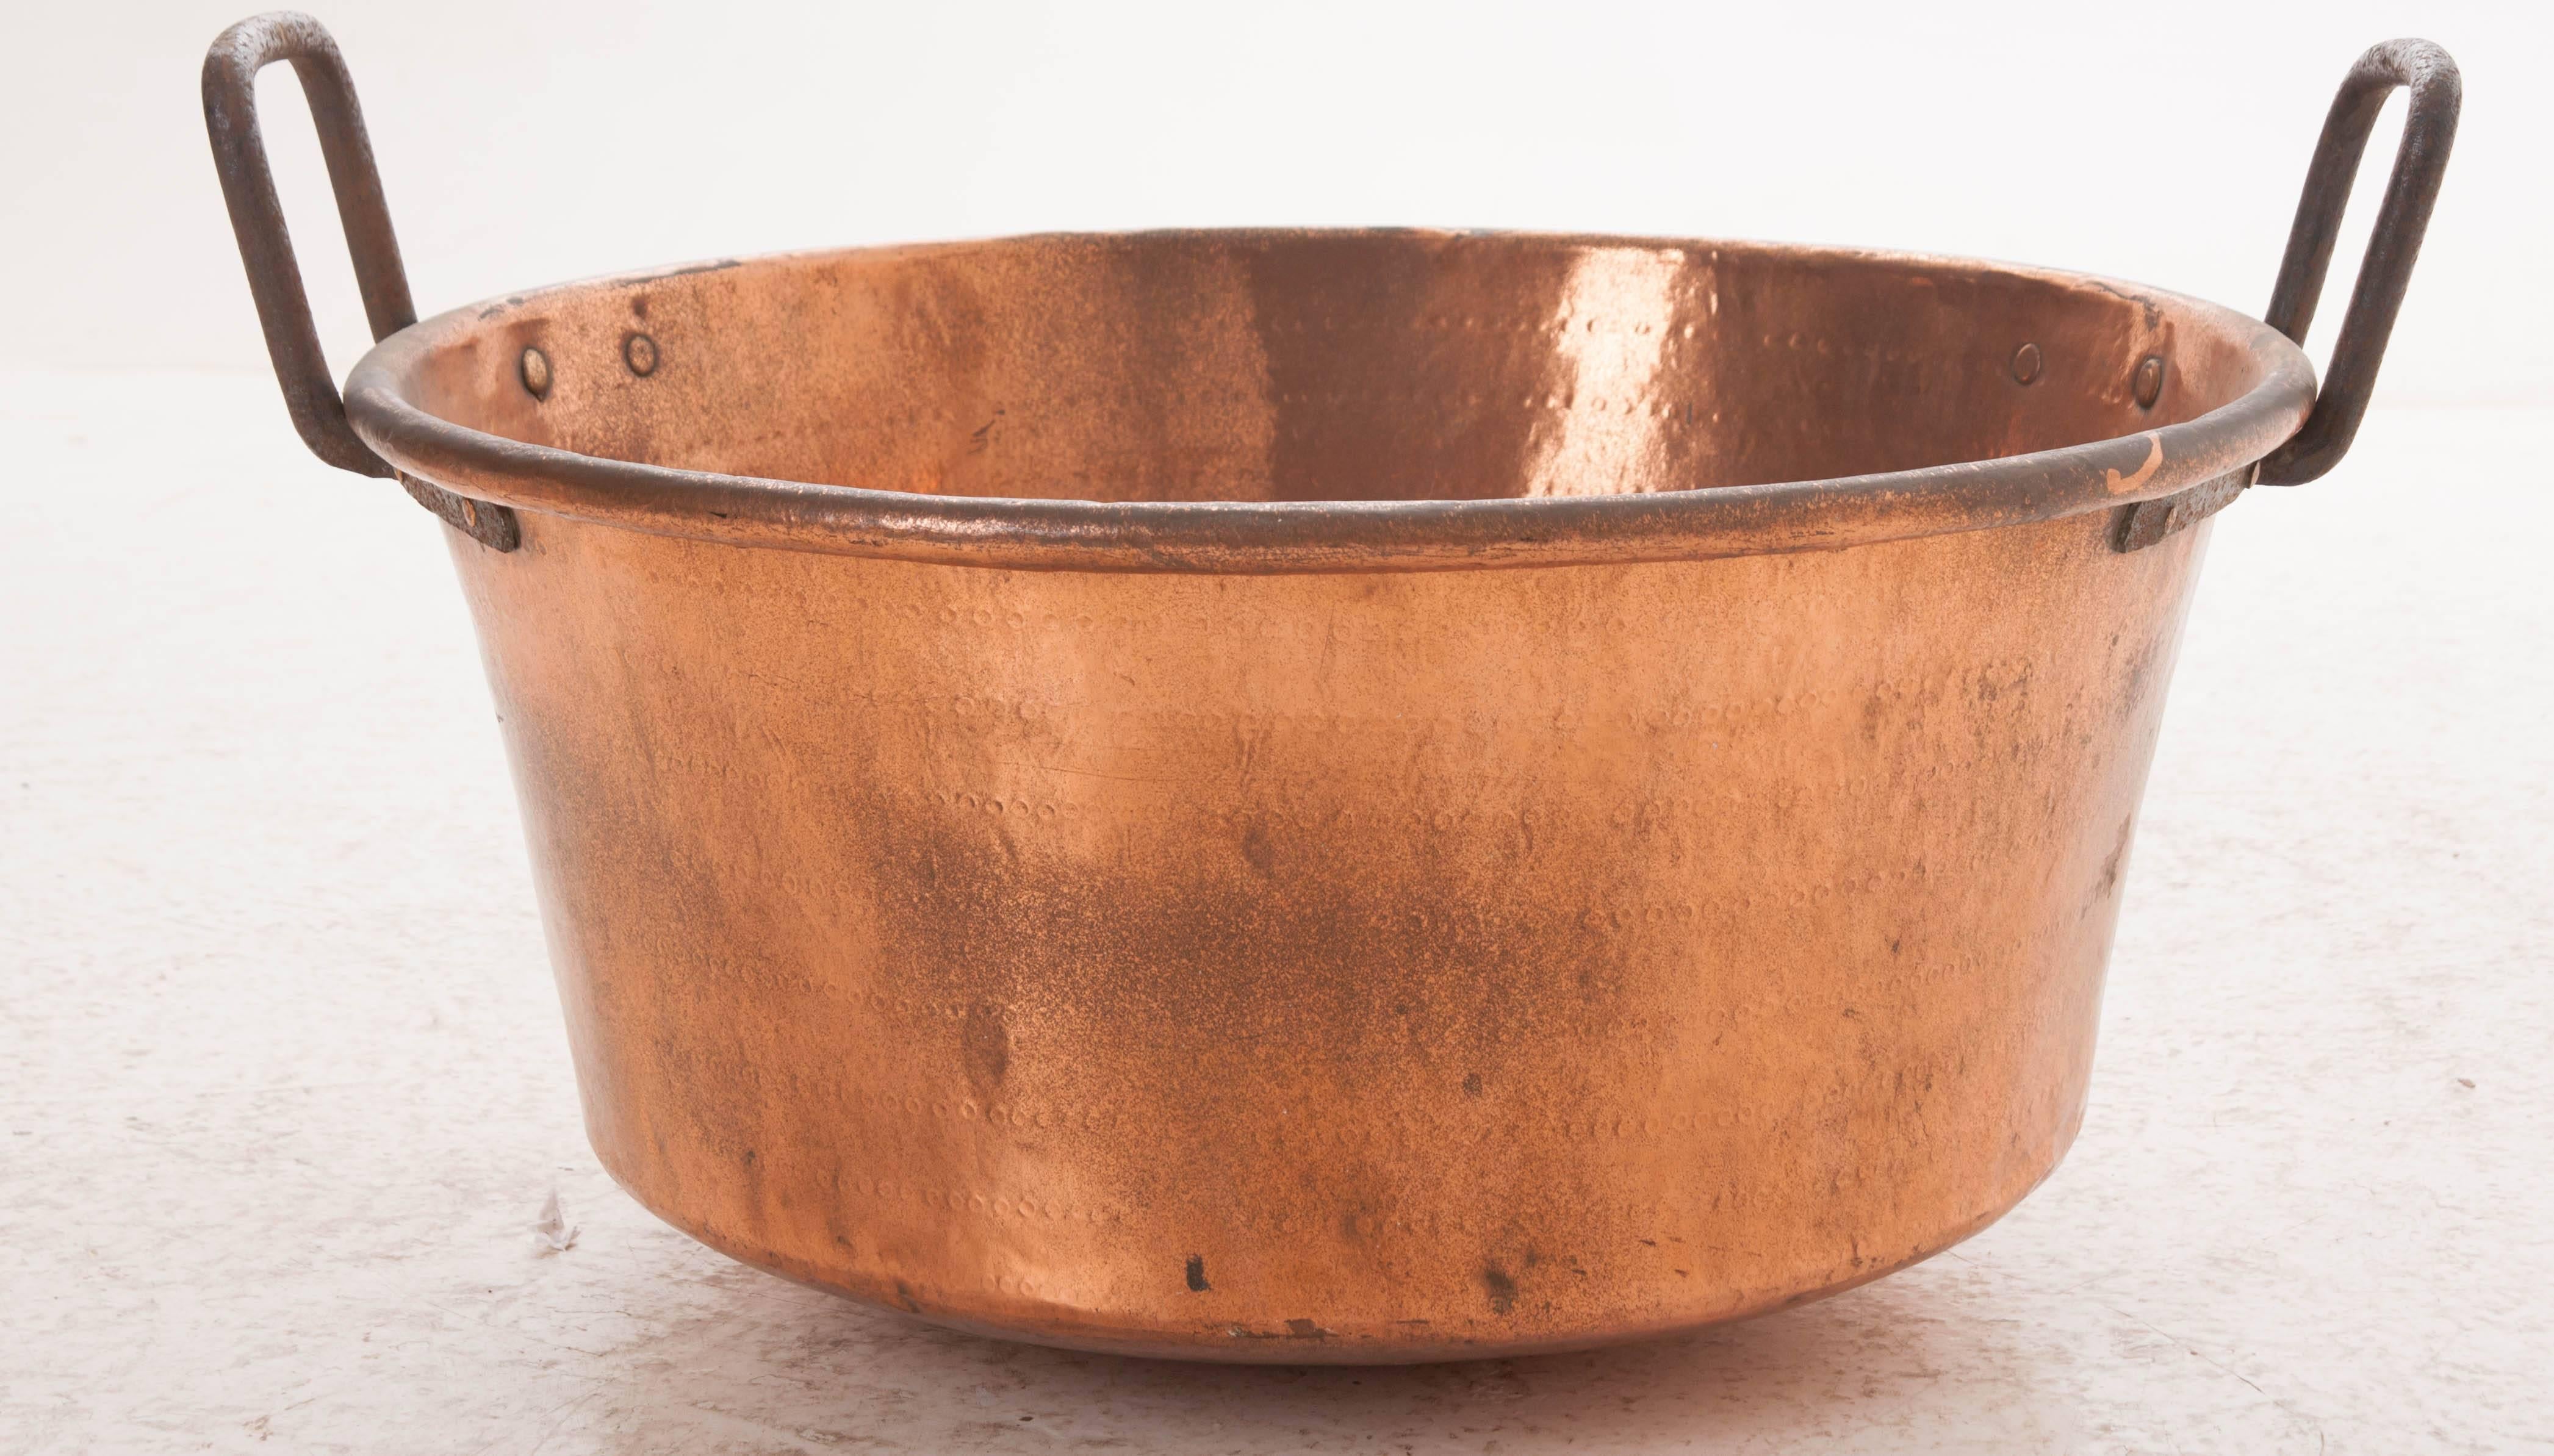 This massive 19th century copper pot is known as a jam pan. Used in the production of fine jambs and jellies, these large vessels often have hammered interiors and large iron handles and would be used to cook down the fruit and sugar. Today, this